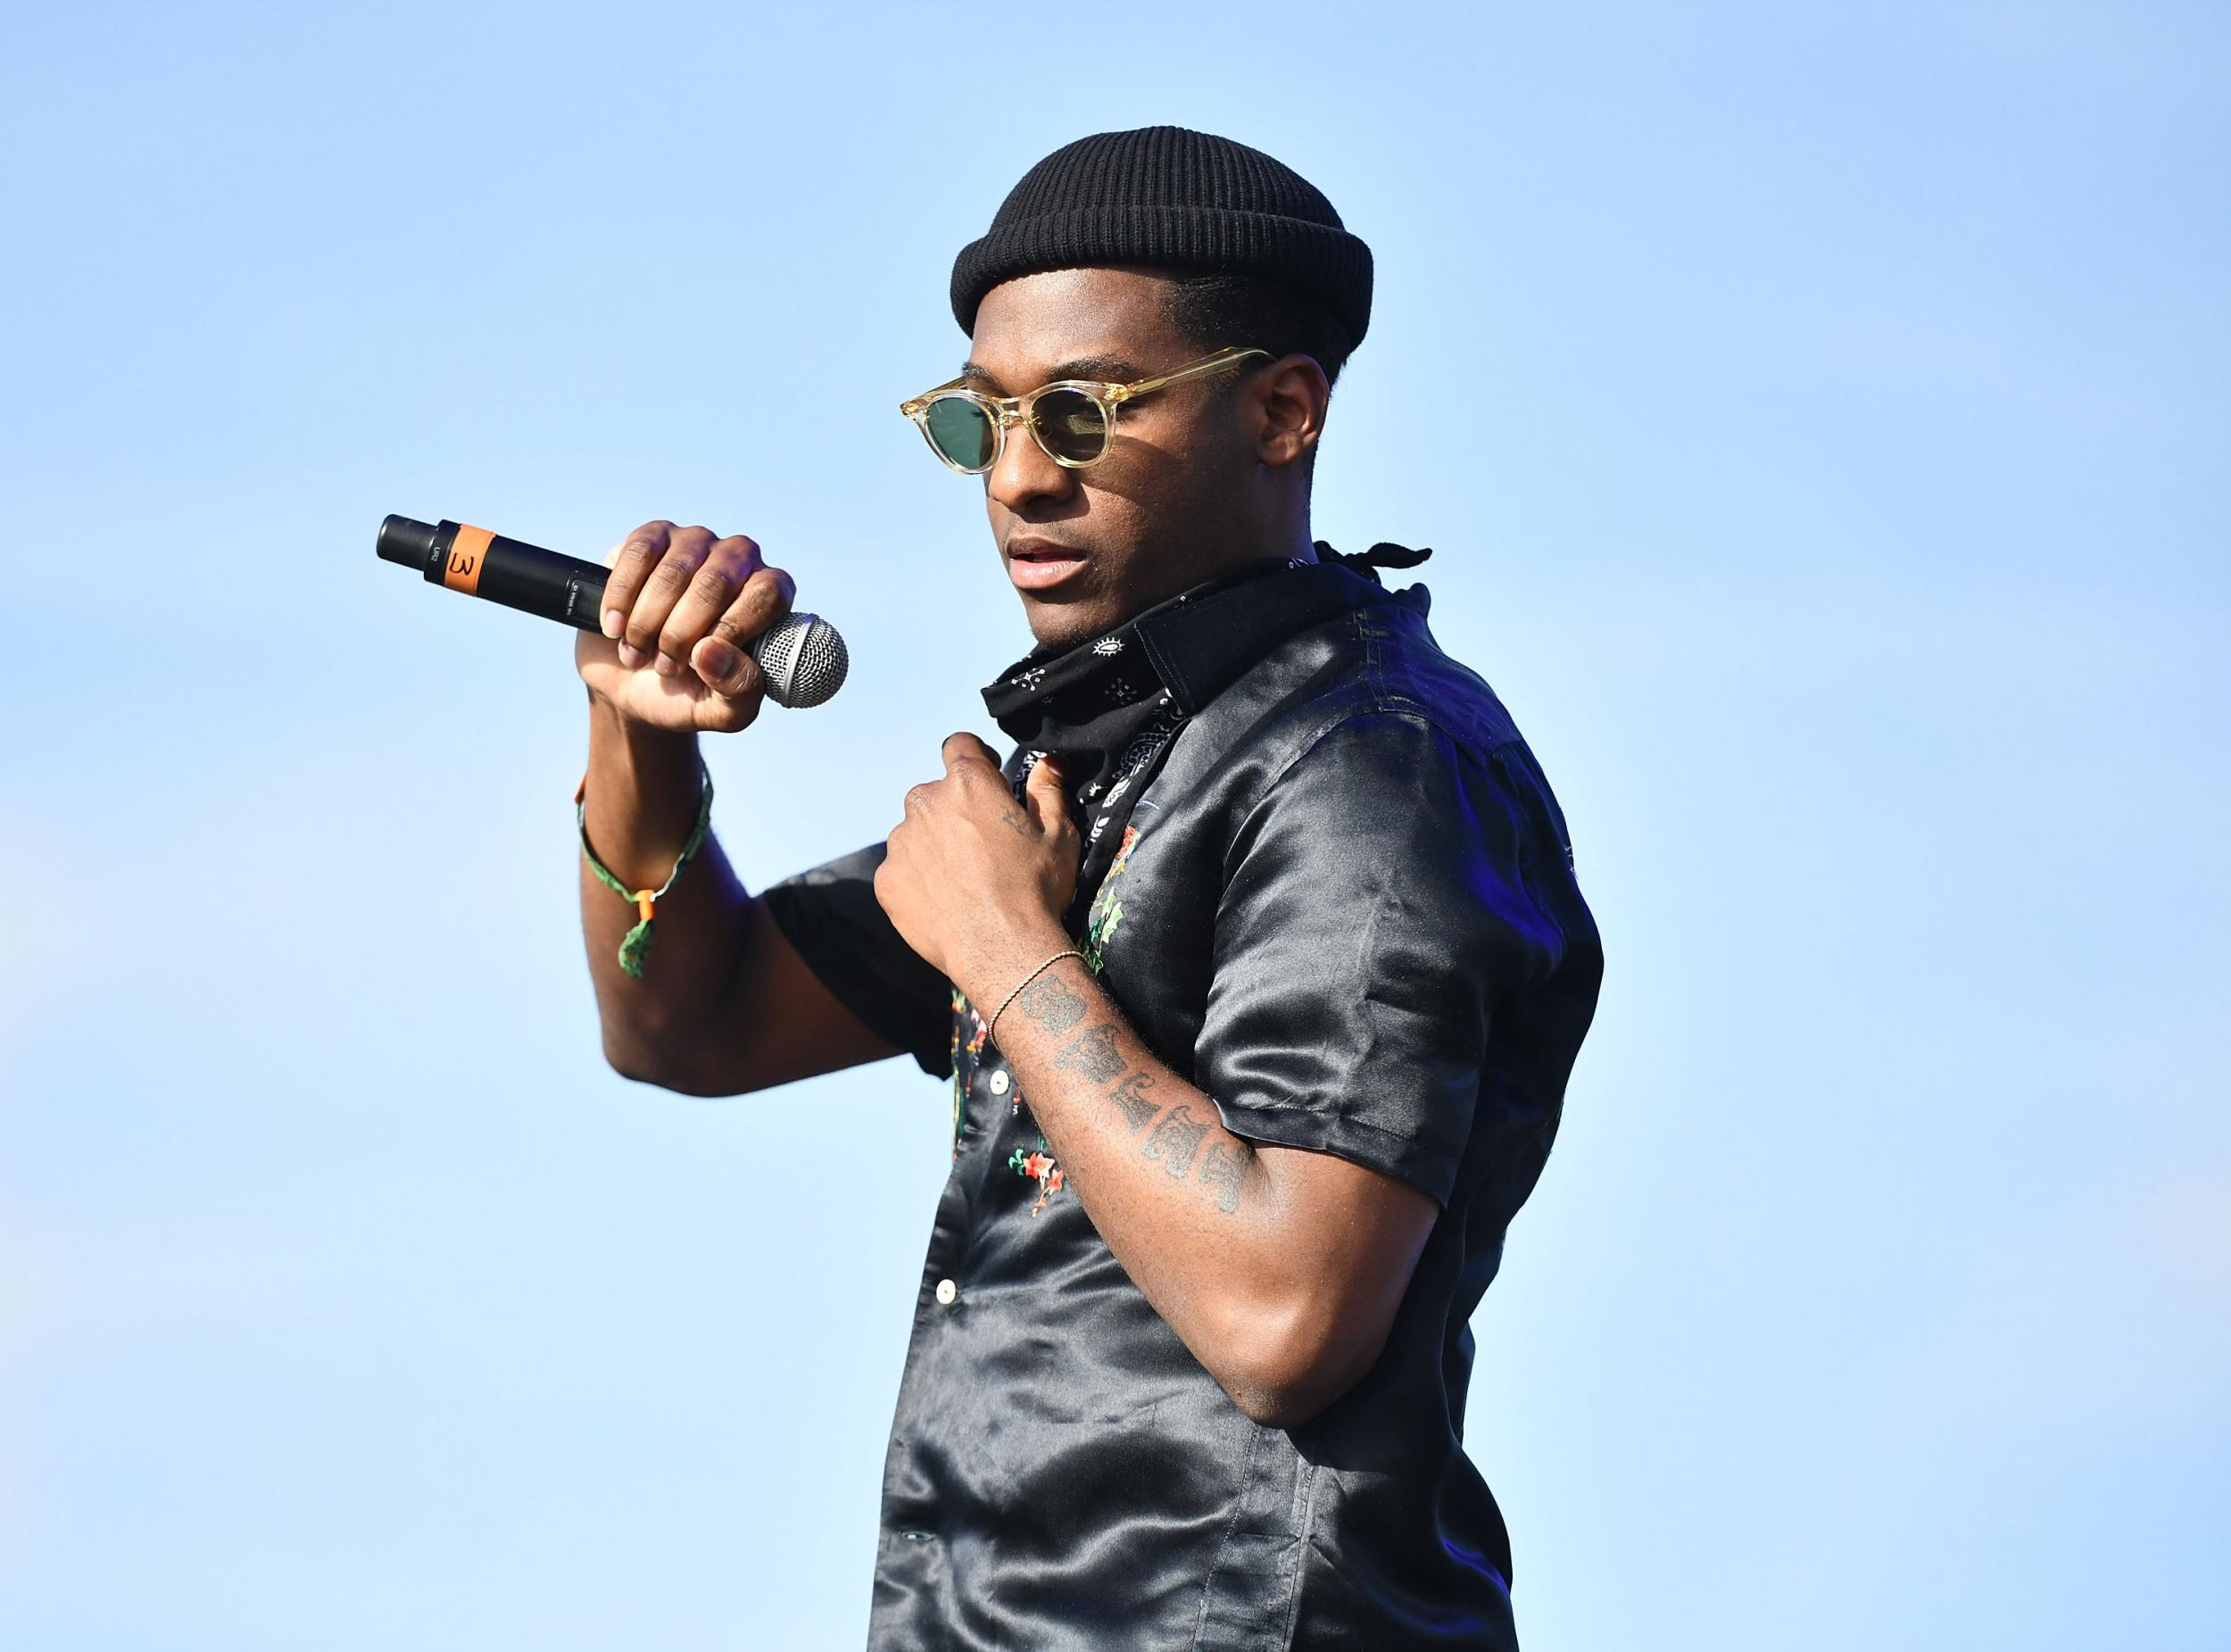 Singer Leon Bridges performs as a special guest on the Outdoor stage during week 1, day 3 of the Coachella Valley Music and Arts Festival on April 15, 2018 in Indio, California.